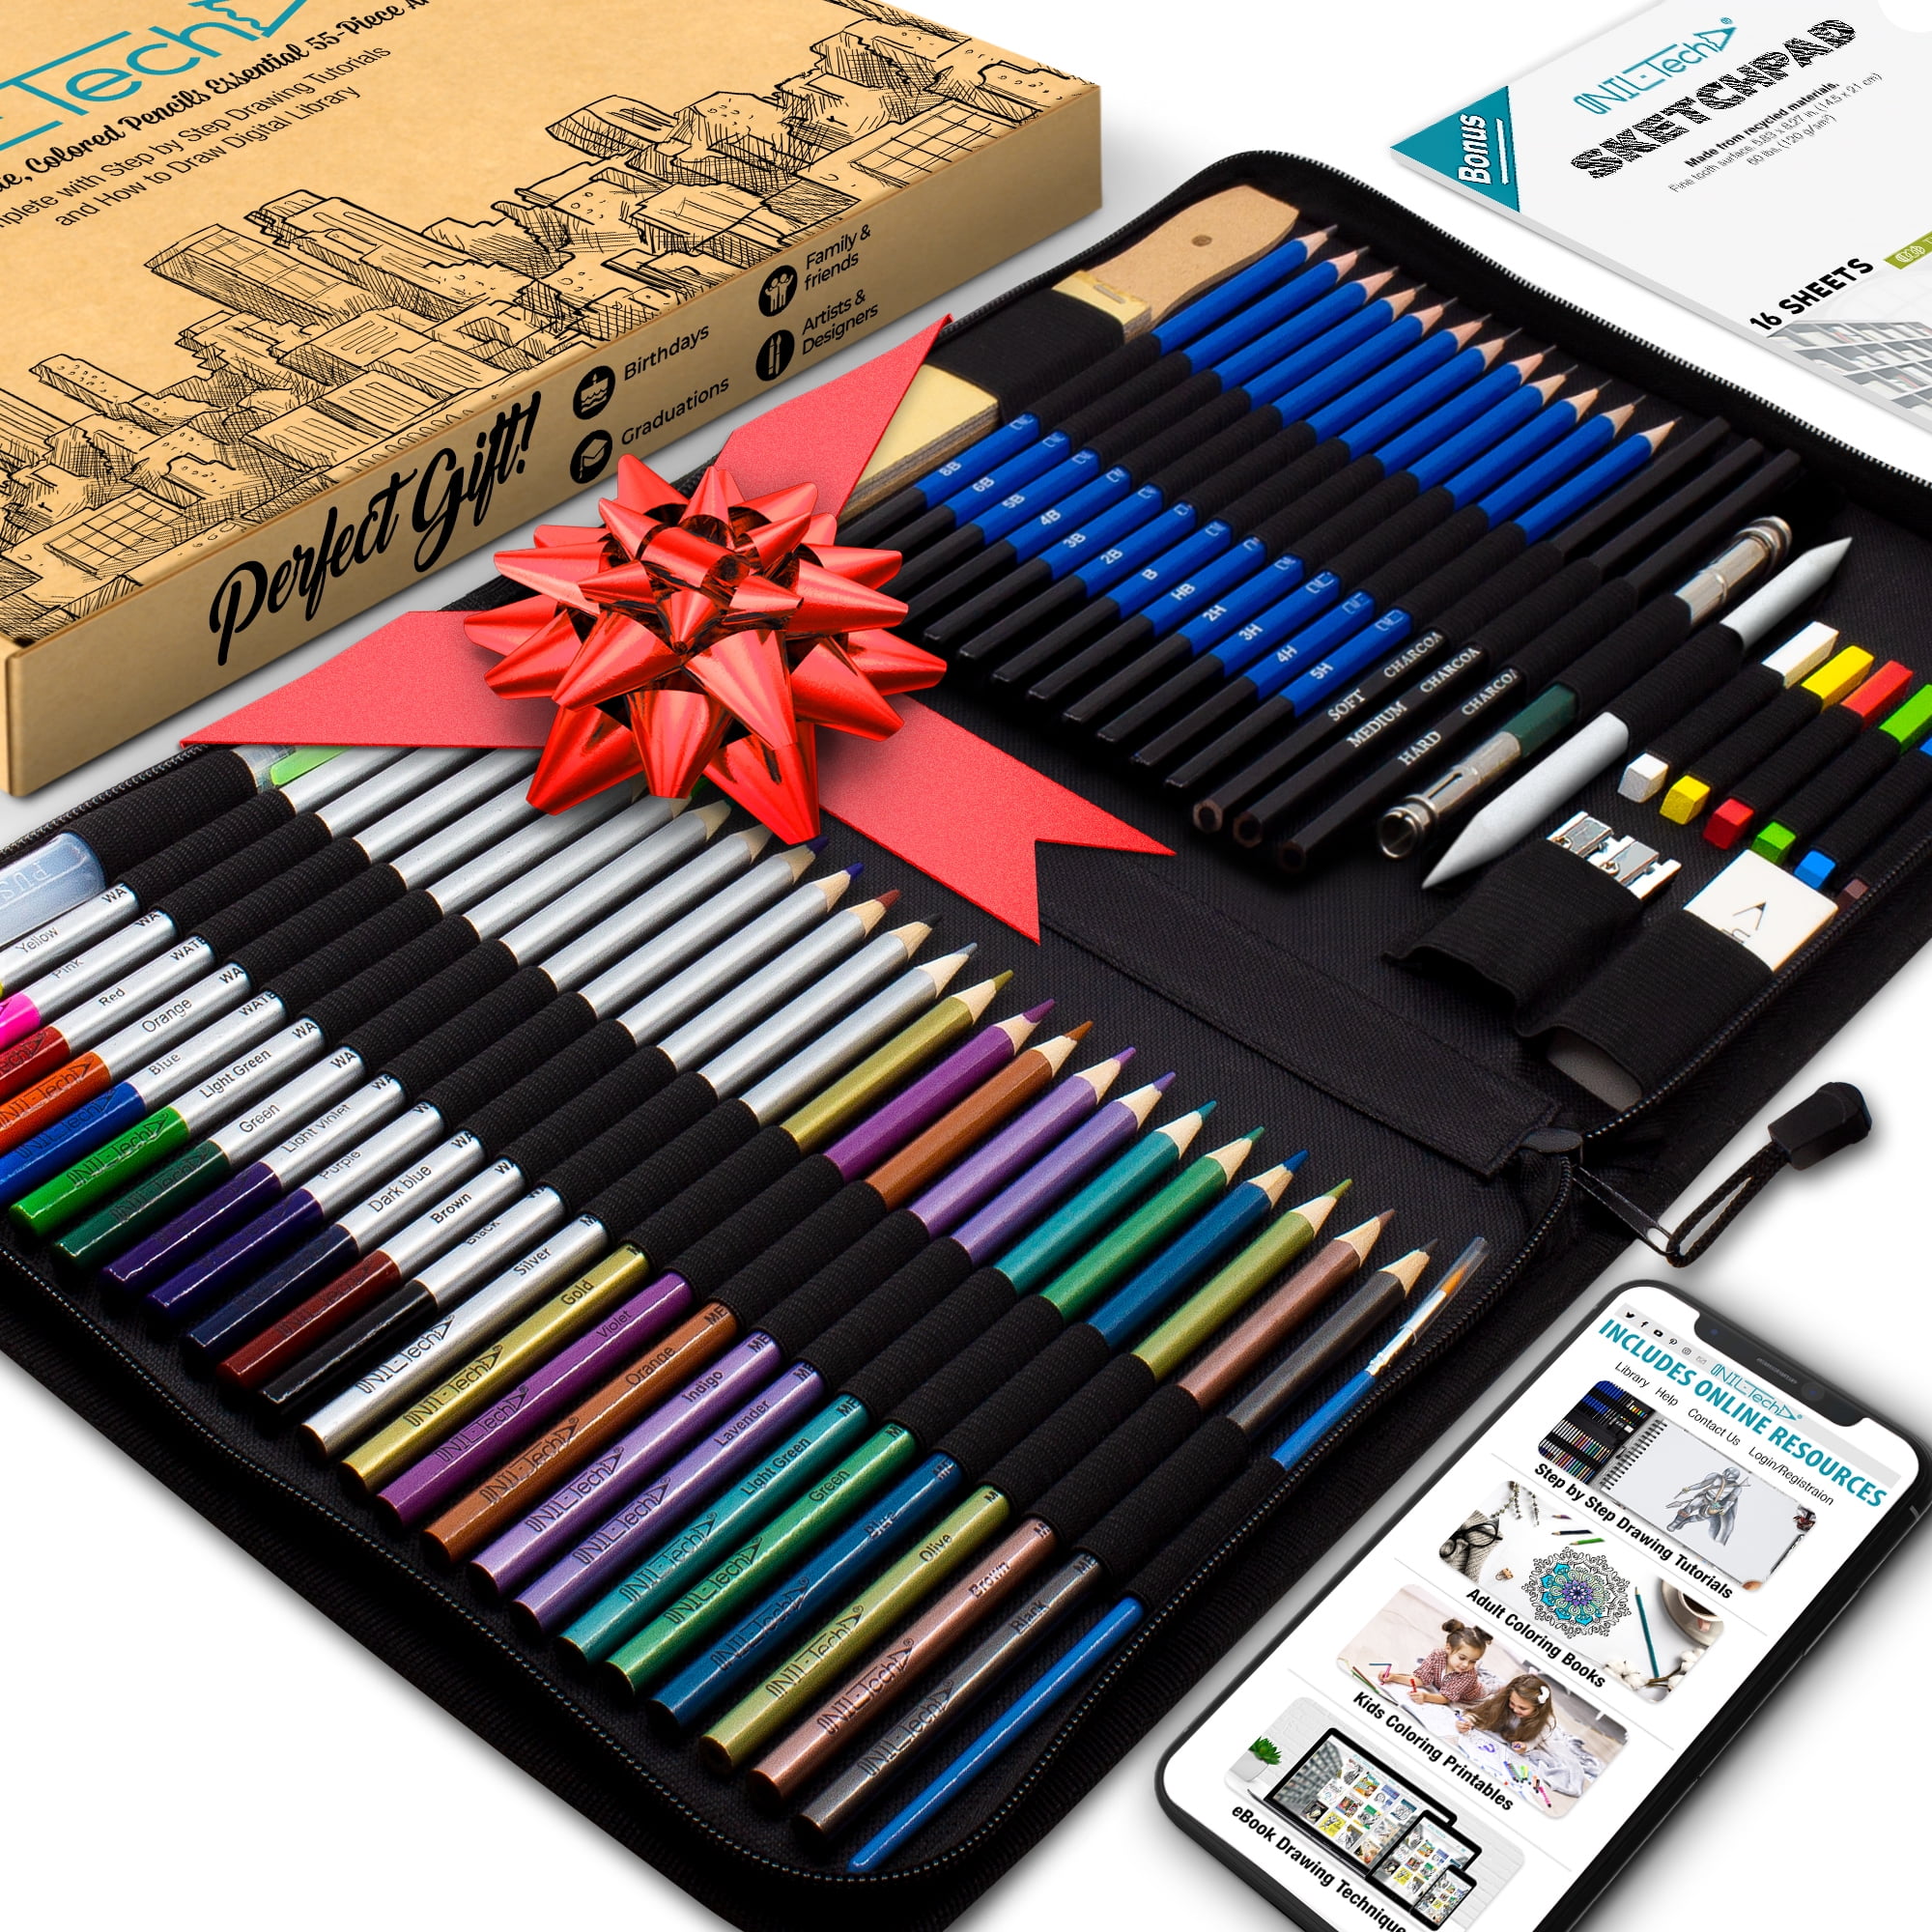 GoXteam 150-Pieces Deluxe Art Set for Kids, Drawing Art Supplies in a  Plastic Case, Great Gift for Kids Christmas New Year (Black)